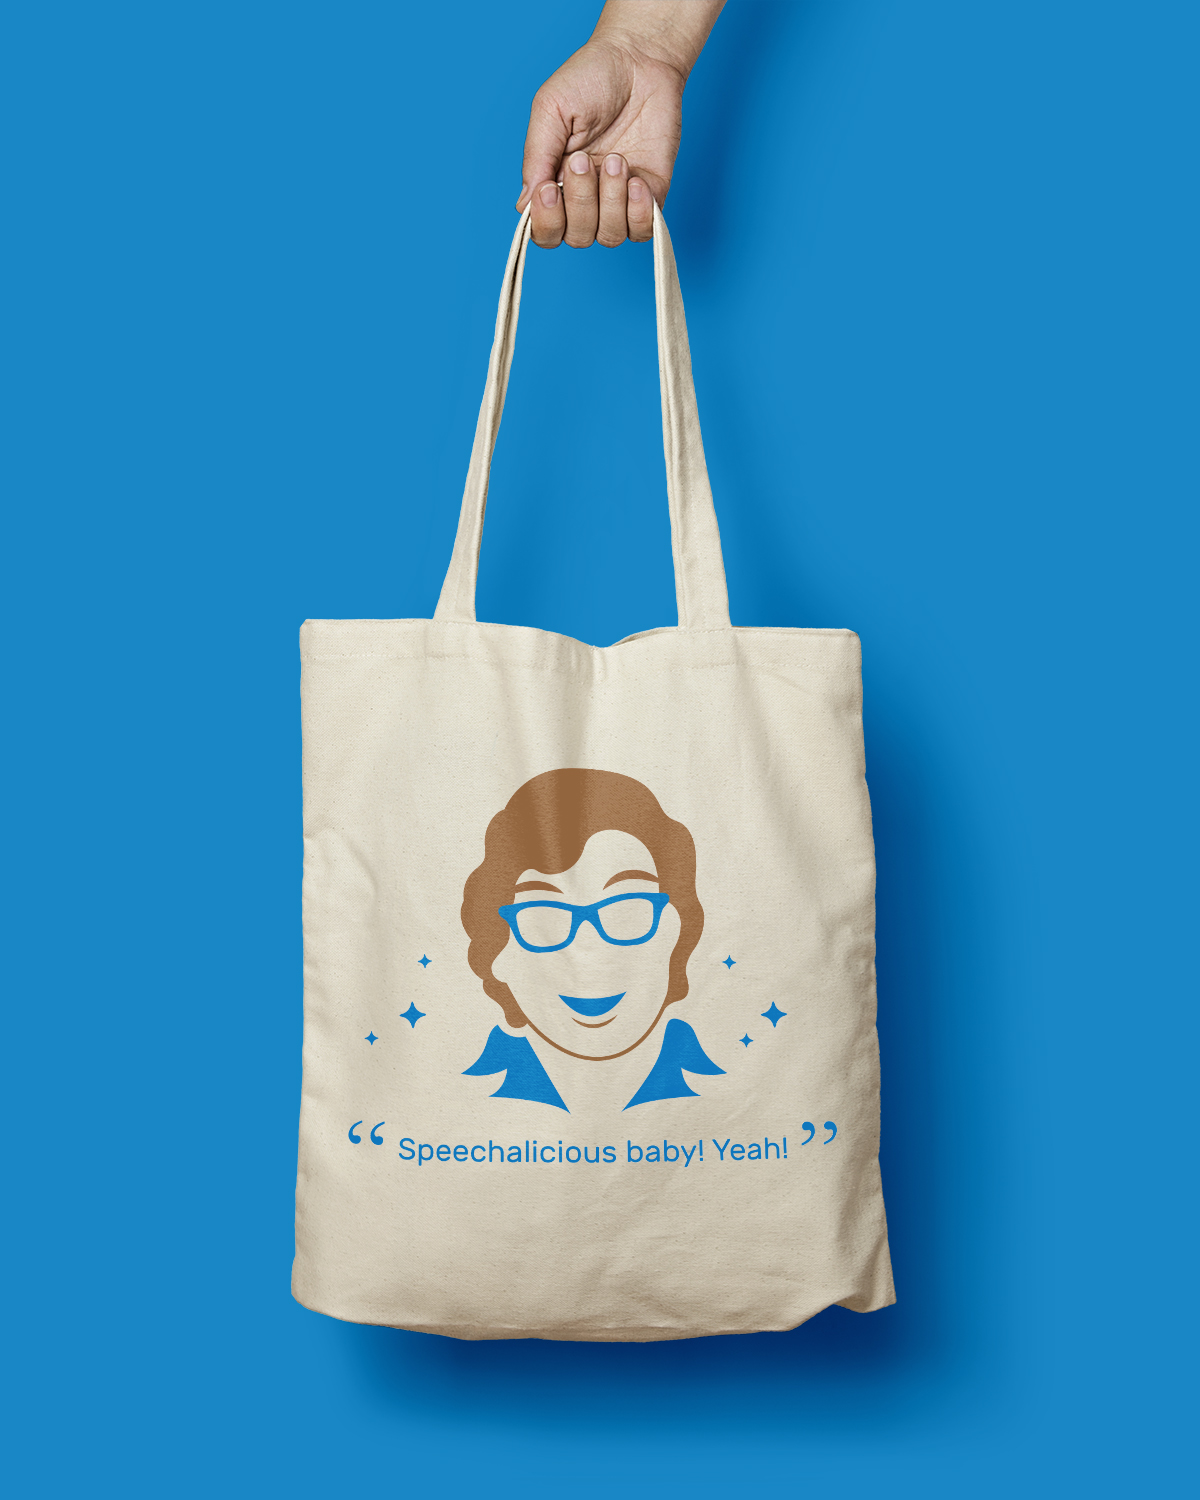 Invo Health: Vector Illustrations on Tote Bags